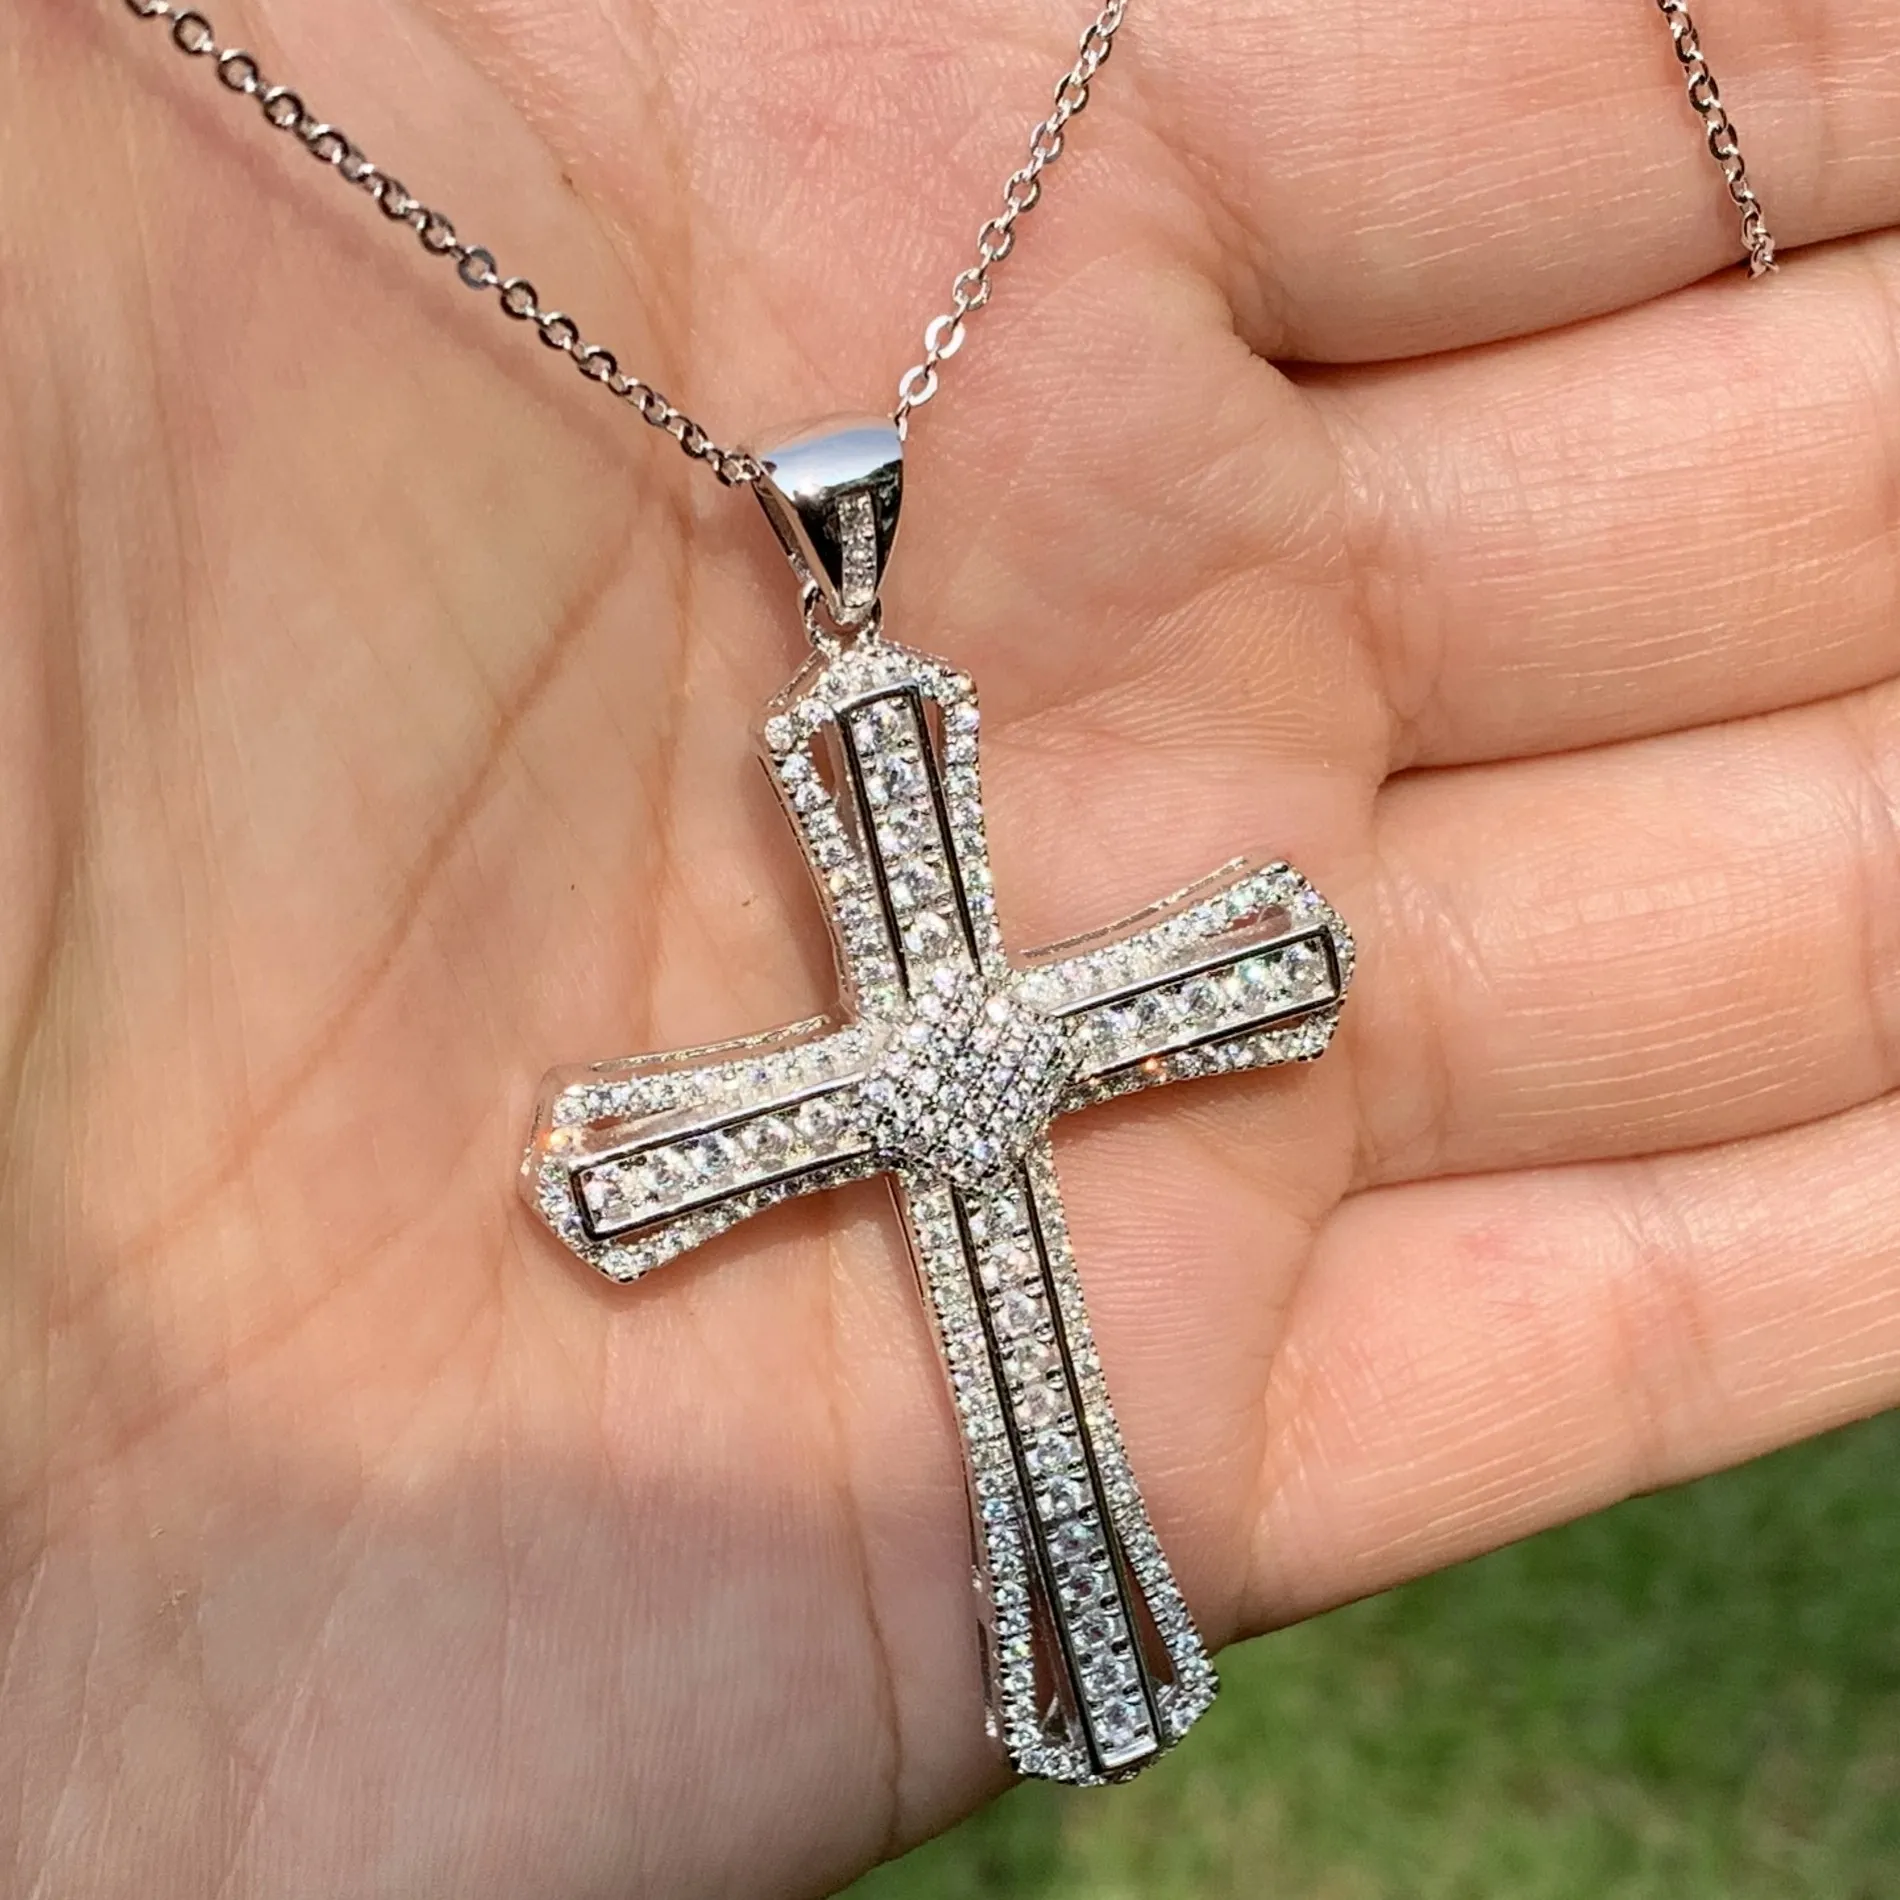 Choucong Brand New Unique Luxury Jewelry Cross Pendant 925 Sterling Silver Pave White 5a Cubic Zirconia CZ Women Necklace Wi273X